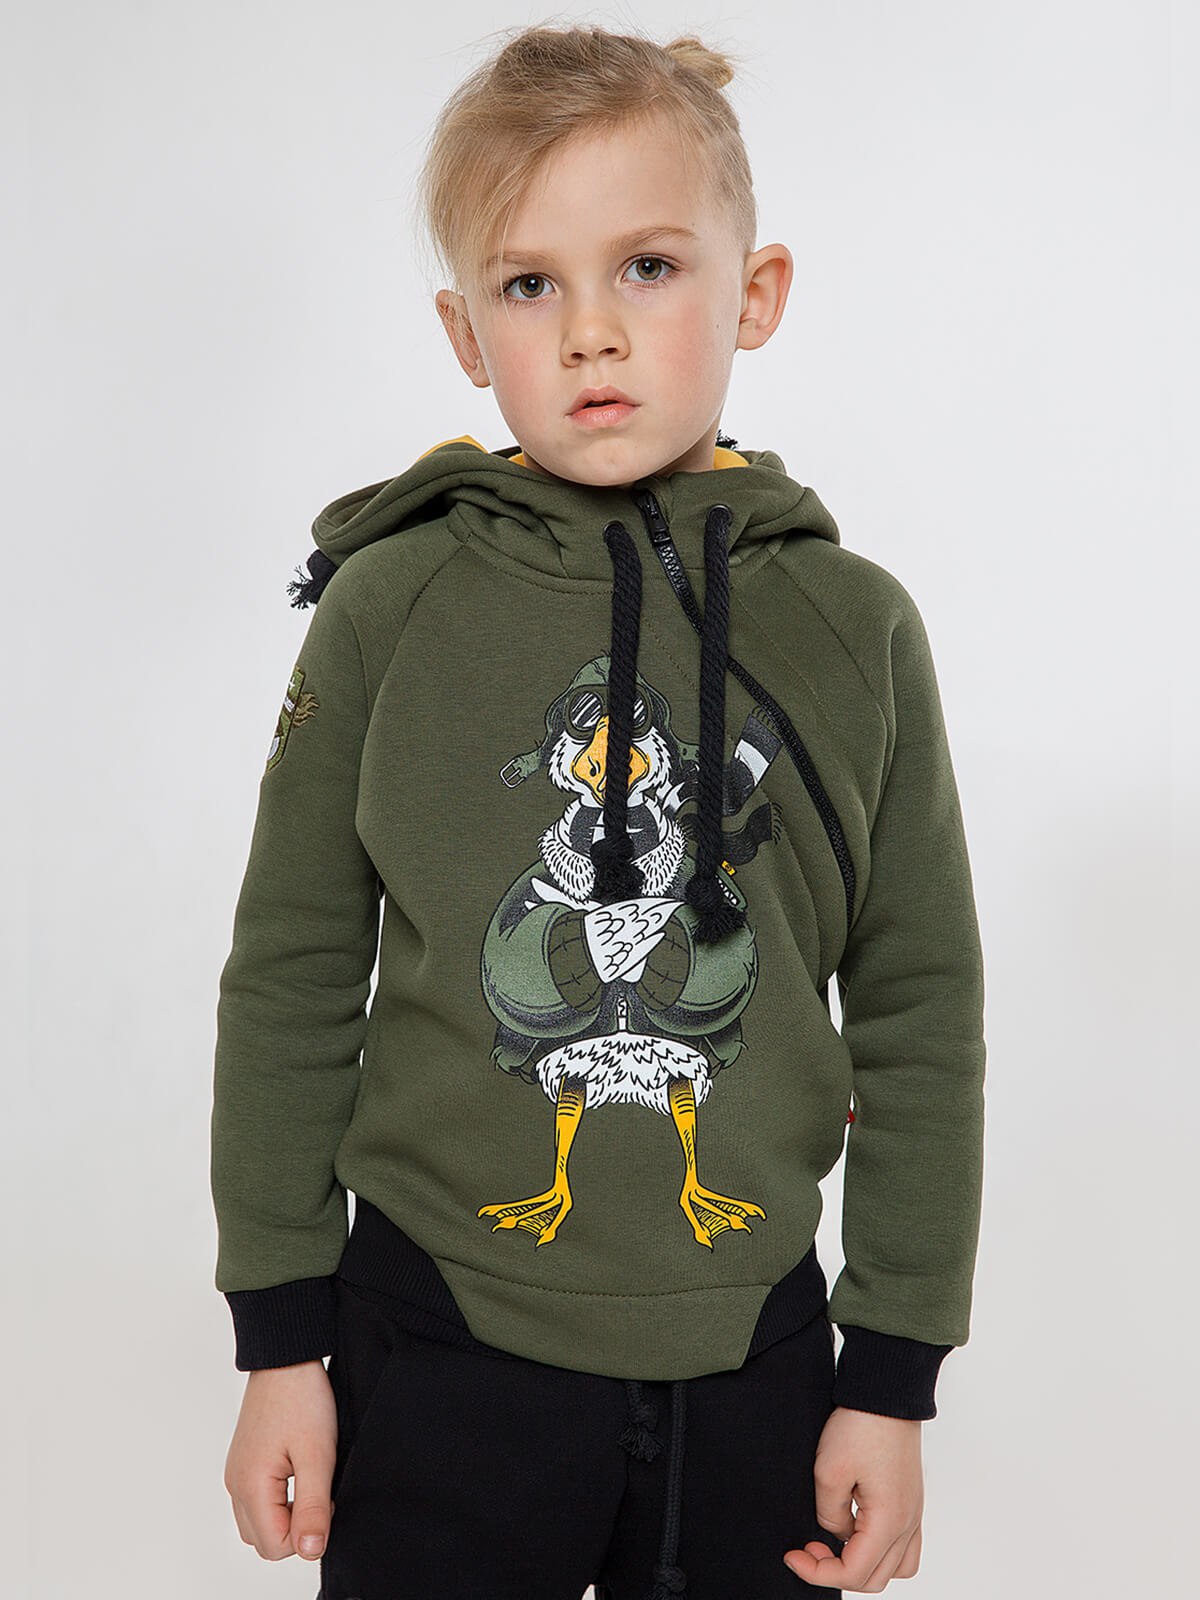 Kids Hoodie Goose. Color khaki. Hoodie: unisex, well suited for both boys and girls.